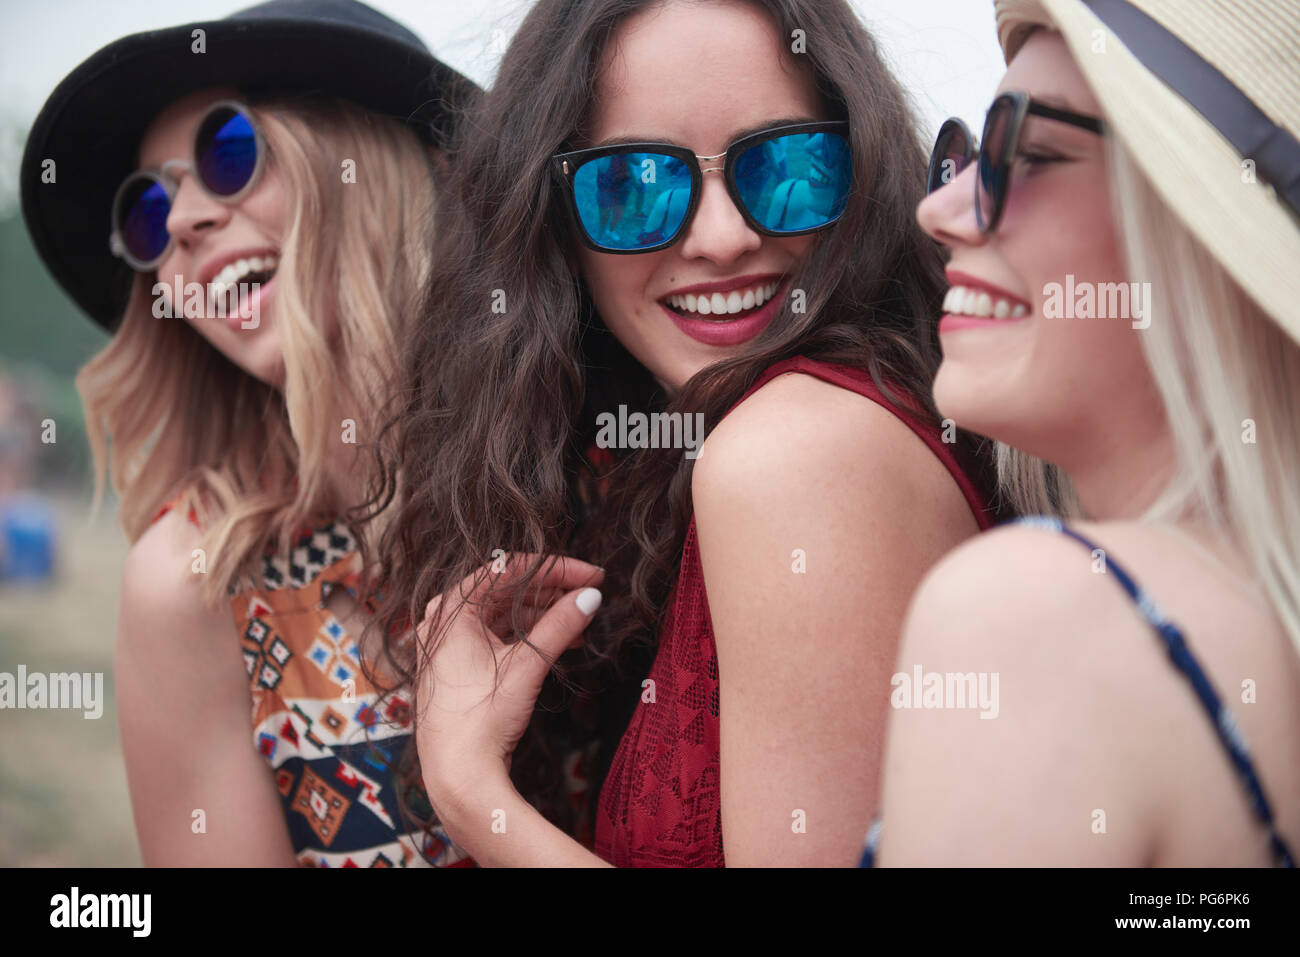 Three women dancing at the music festival Stock Photo